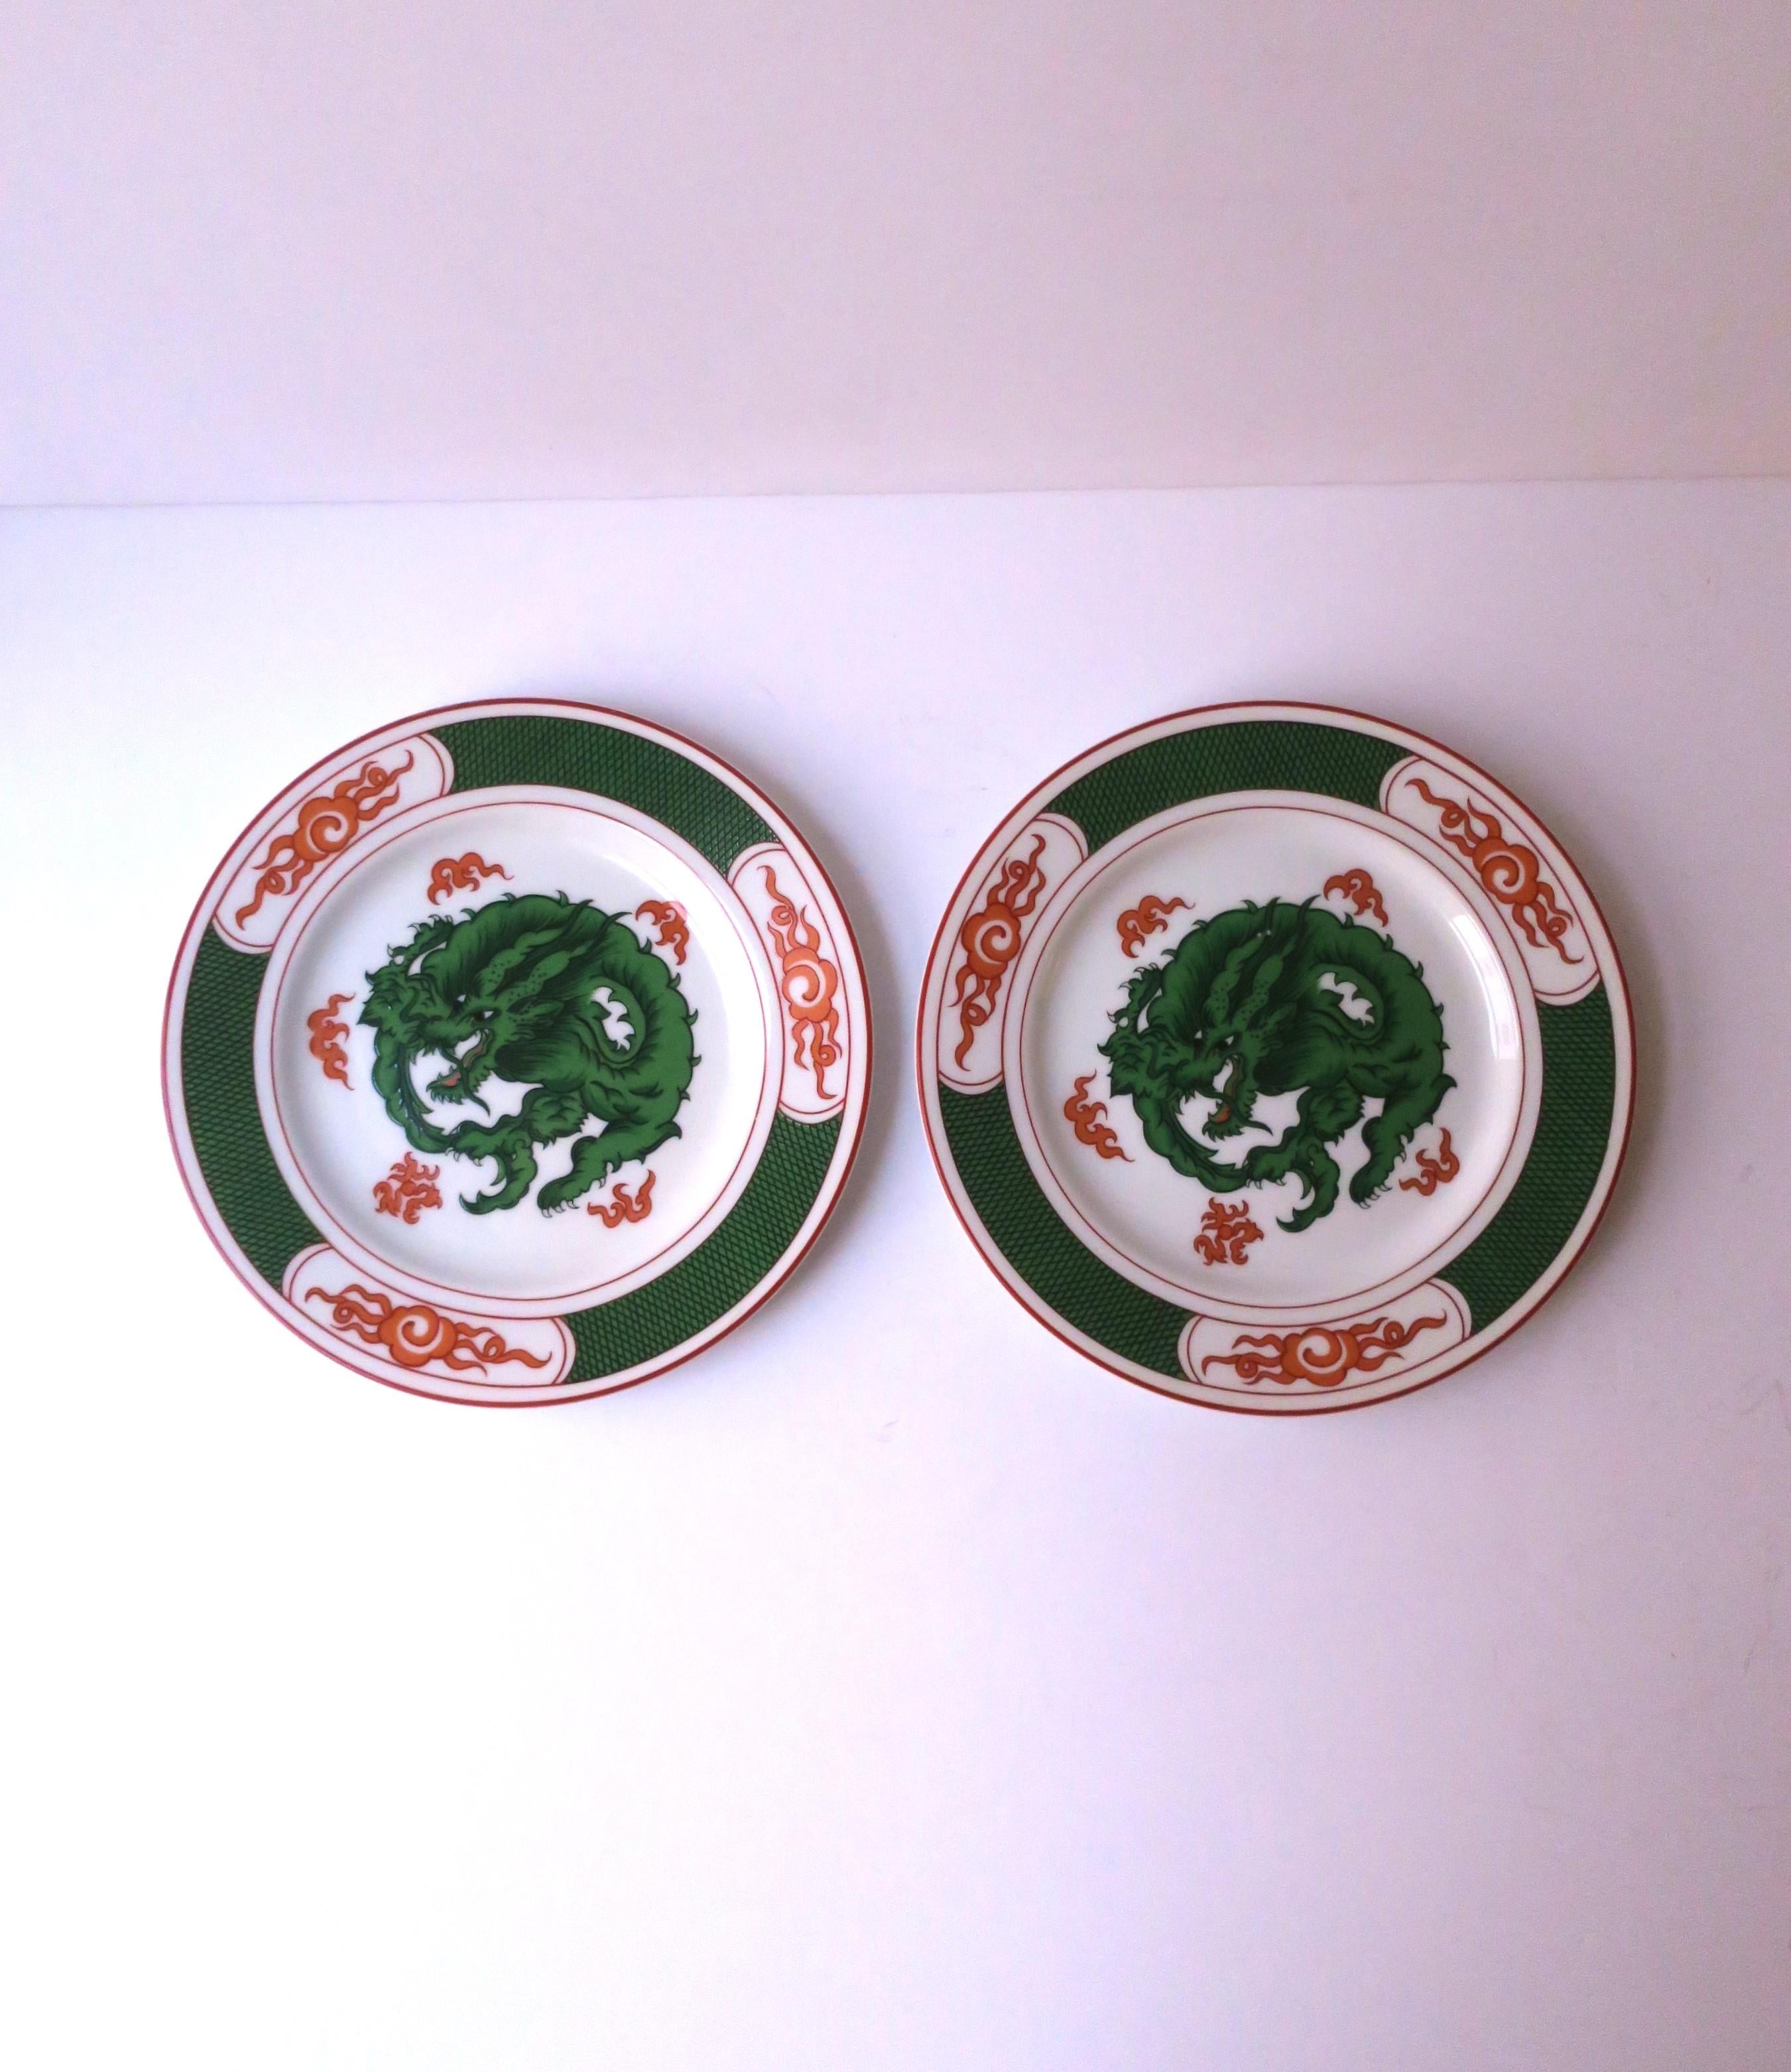 Chinoiserie Porcelain Plates with Dragon Design, Set of 2